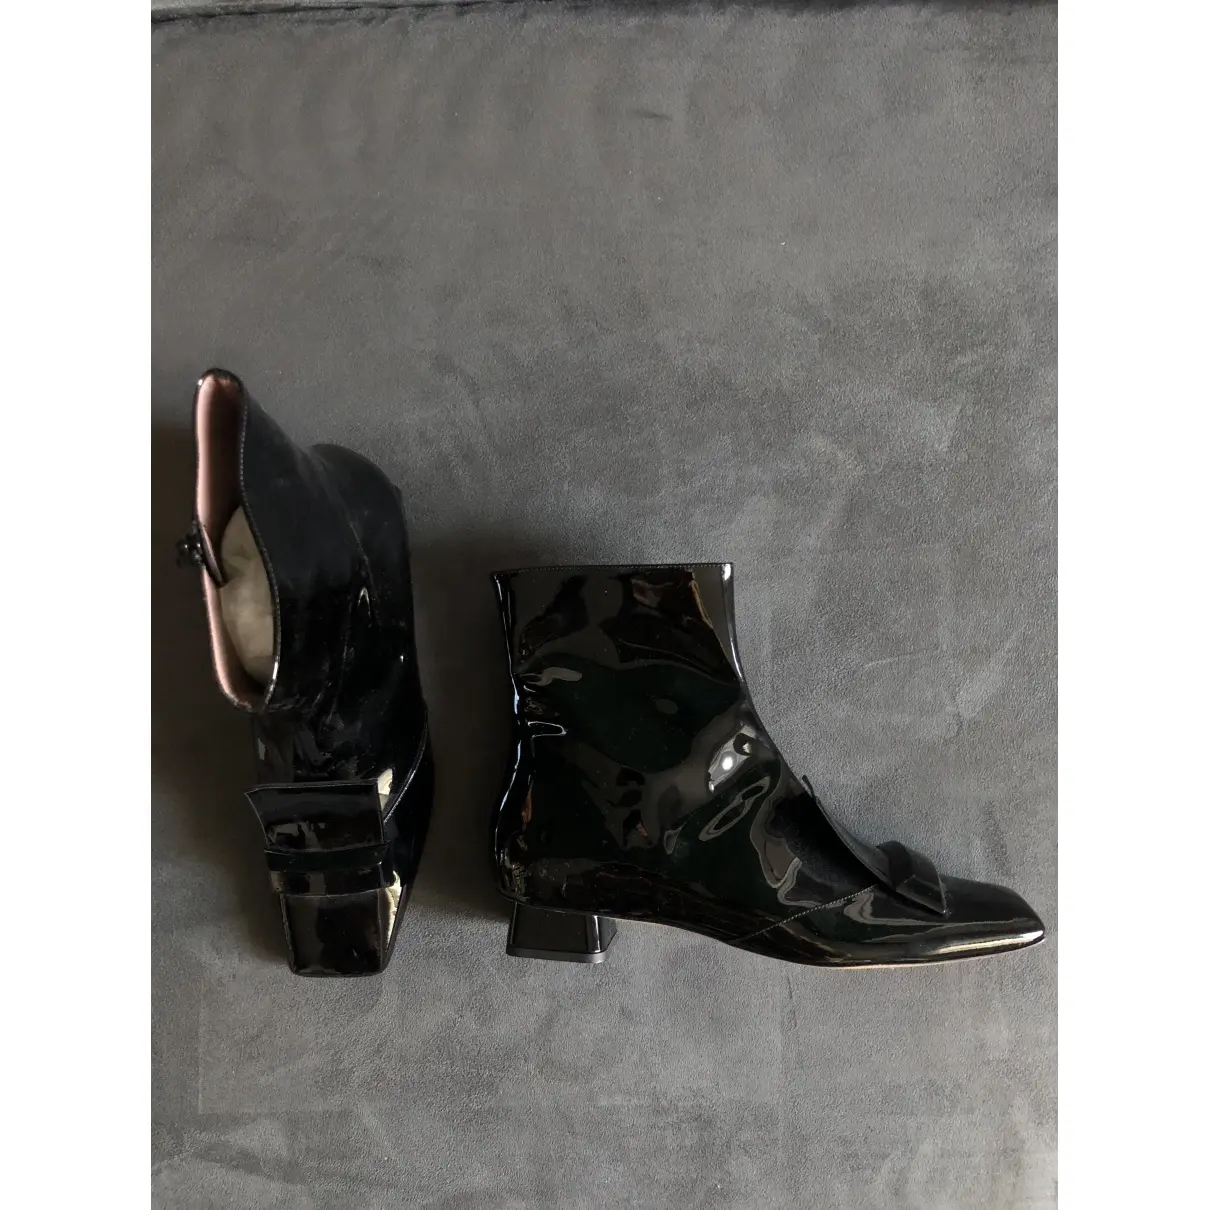 Buy Rayne London Patent leather ankle boots online